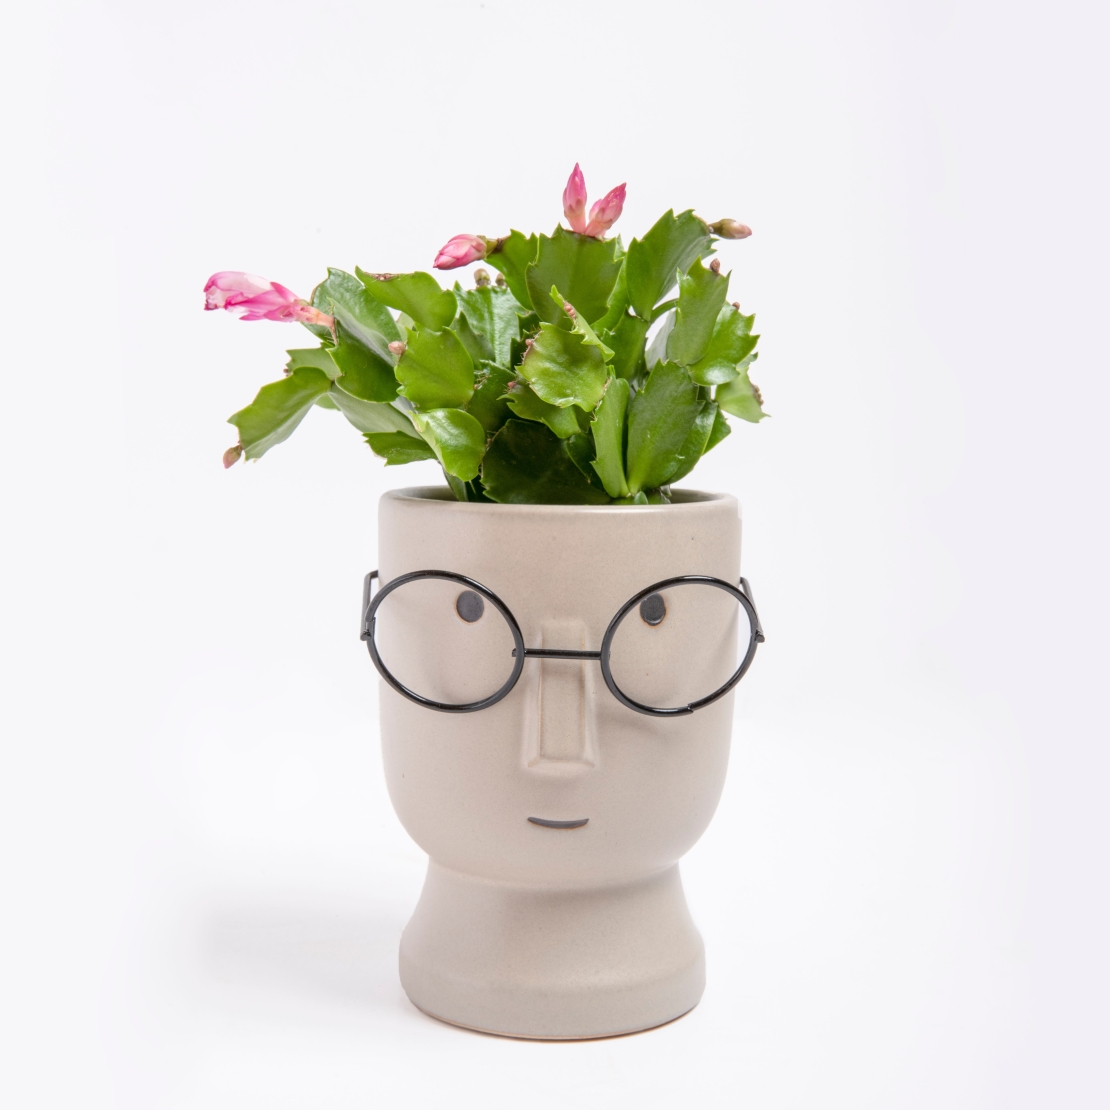 Zygocactus (Christmas Cactus) in a Face Flowerpot with Glasses